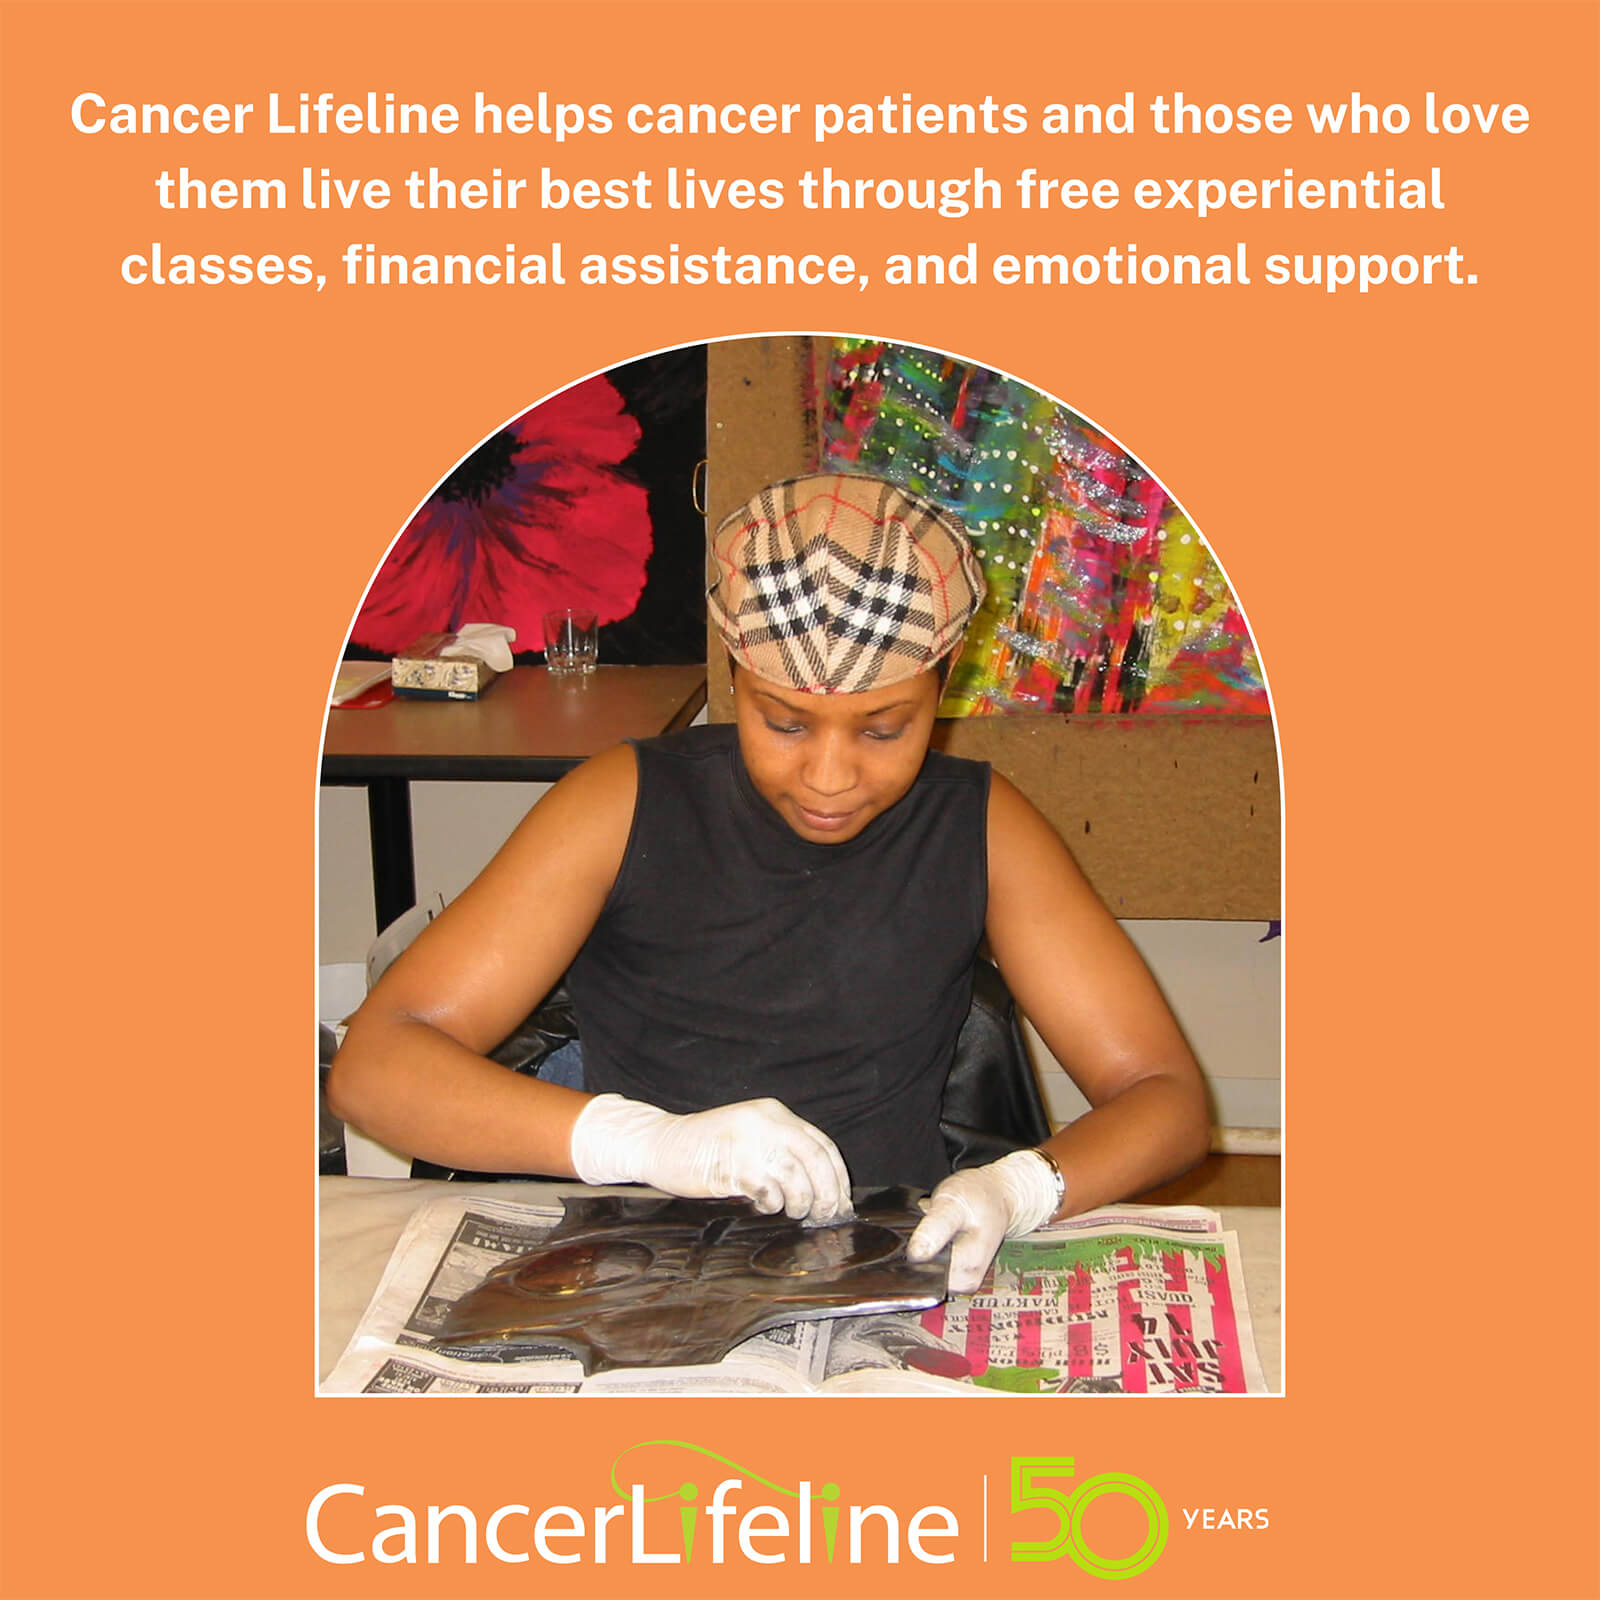 cancer lifeline helps cancer patients and those who love them live their best lives through free experiental classes, financial assistance, and emotional support.